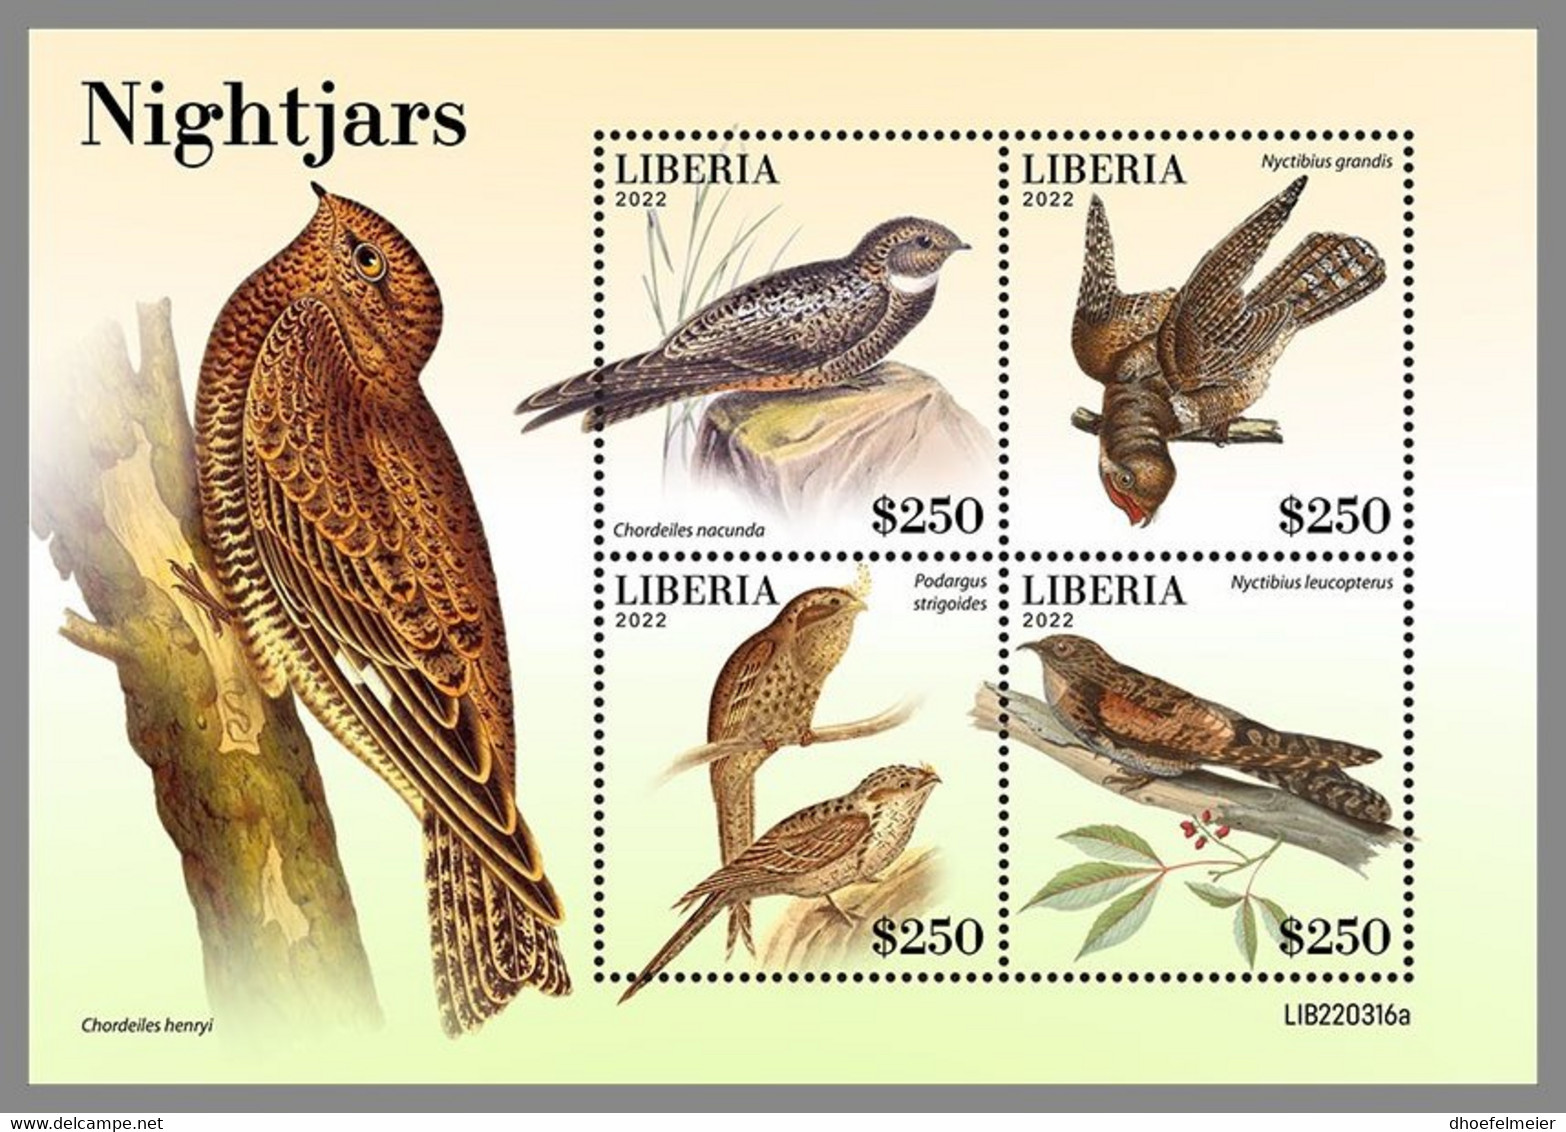 LIBERIA 2022 MNH Nightjars Nachtschwalben Engoulevents M/S - OFFICIAL ISSUE - DHQ2249 - Golondrinas